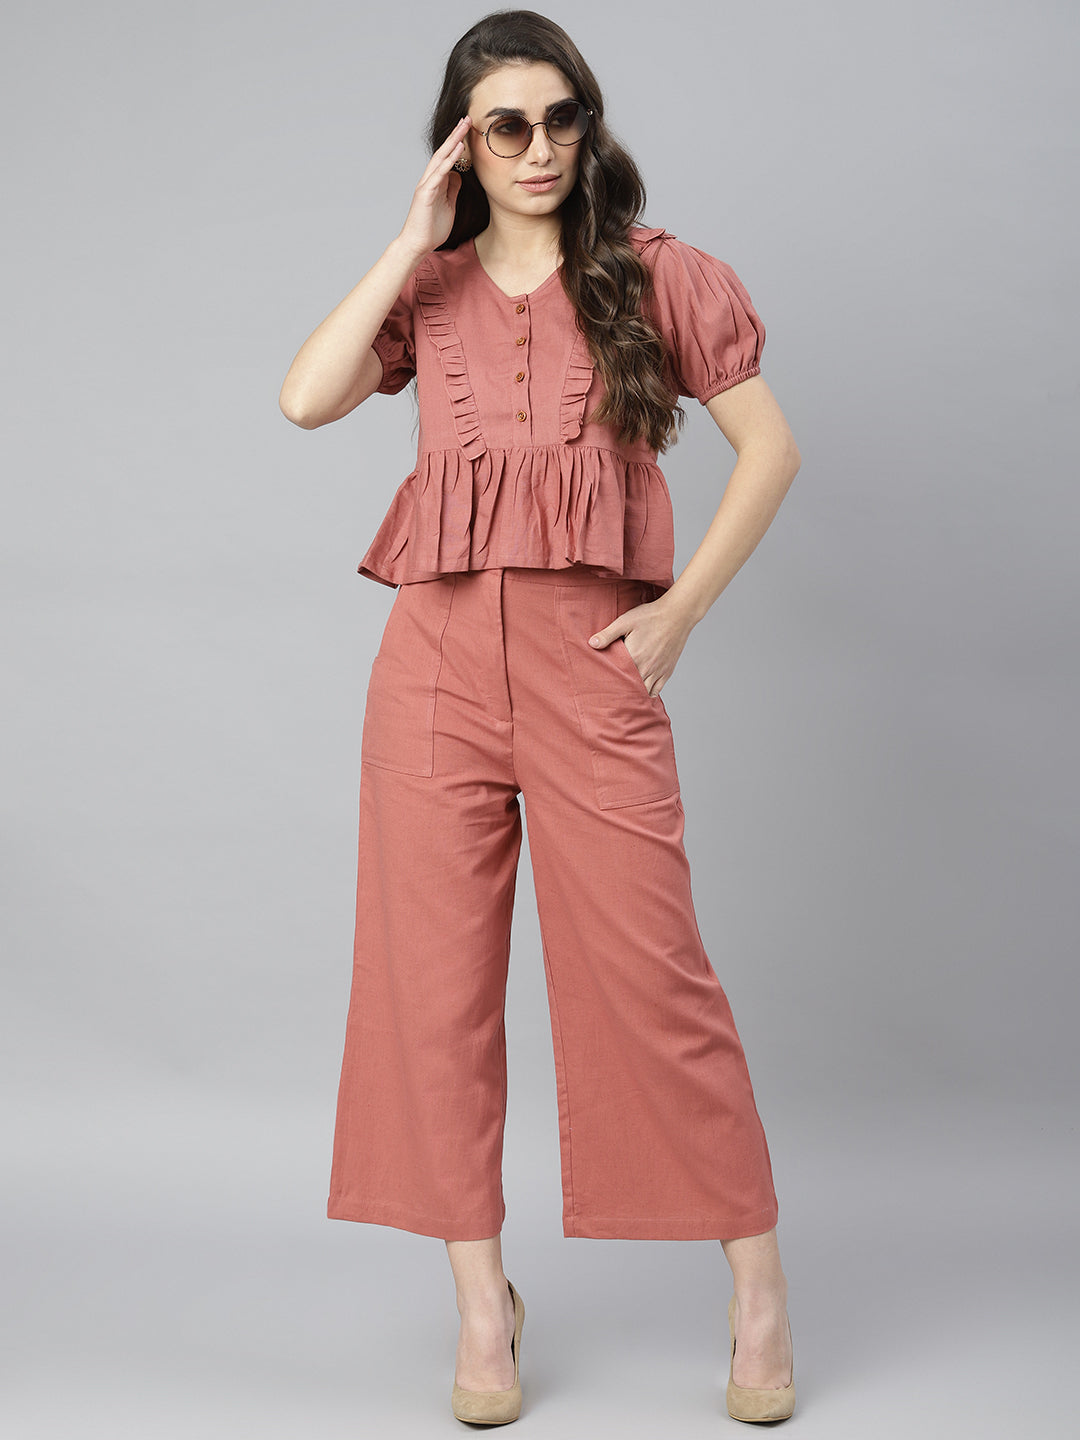 Women's Pink Solid Trouser